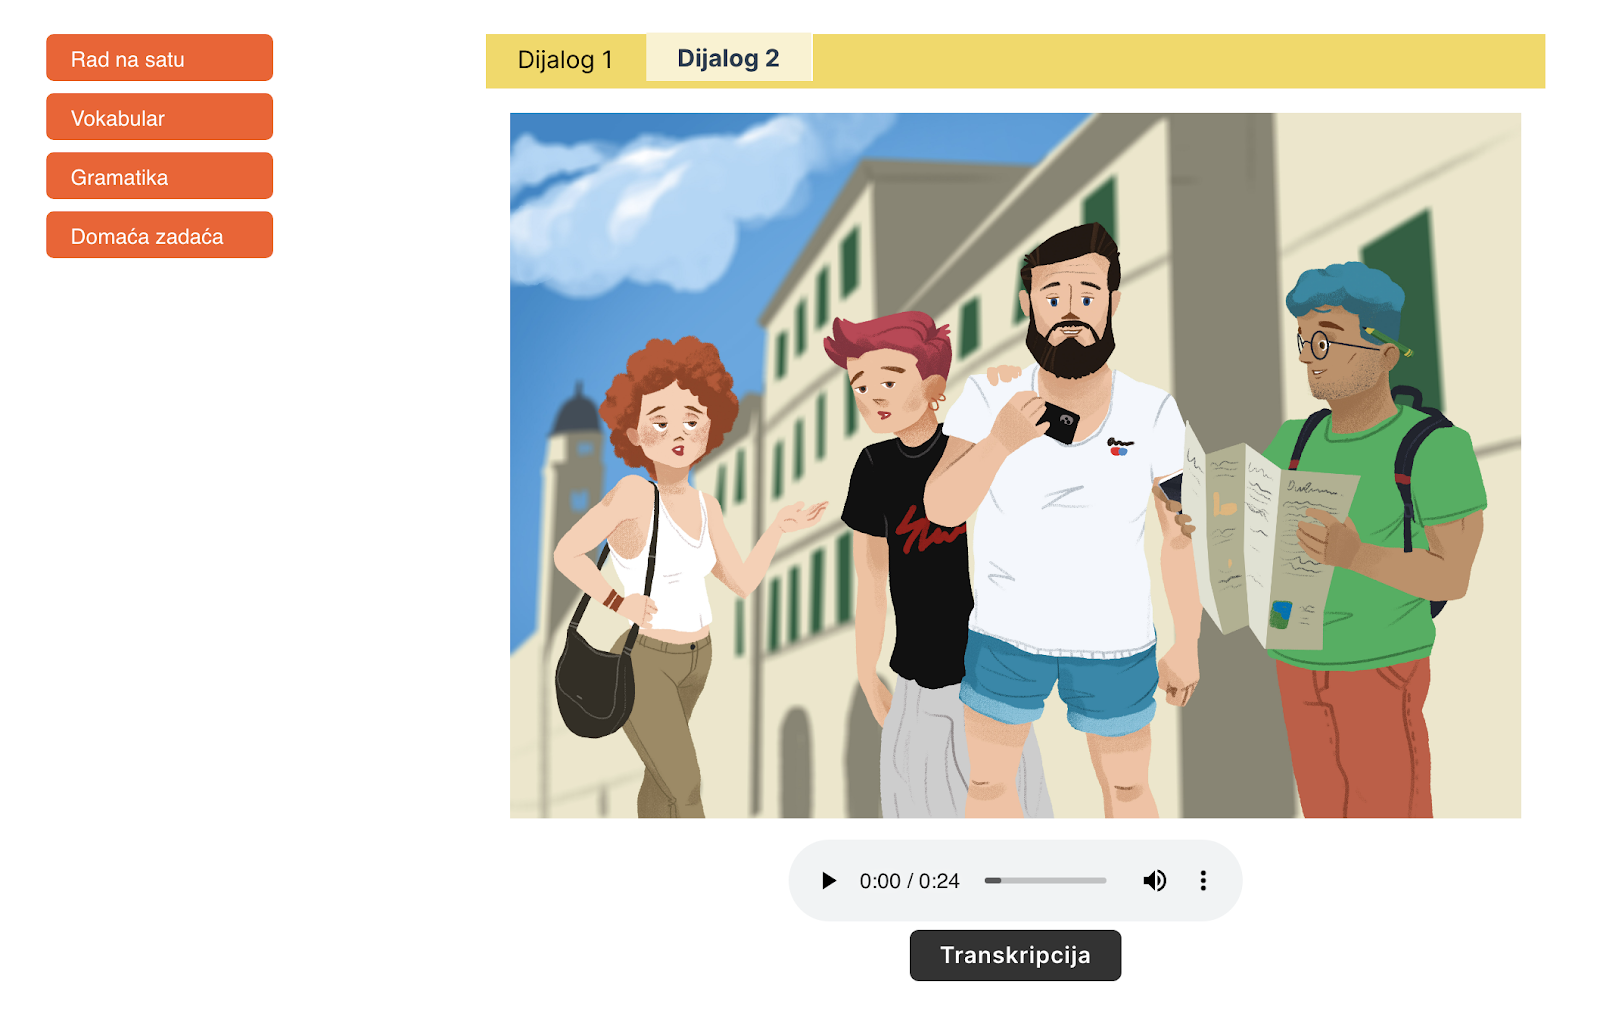 Lesson page screenshot. Large illustration with Croatian characters underneath yellow bar with lesson tabs. On the left are four orange buttons stacked  vertically for grammar, vocabulary, homework, and assigments.
Underneath the illustration is an audio player followed by a button to trigger view of the transcript. The illustration shows four Croatian youth in summer clothes on the street in front of buildings. One woman and three men. It looks like they are looking for a place or sight seeing.